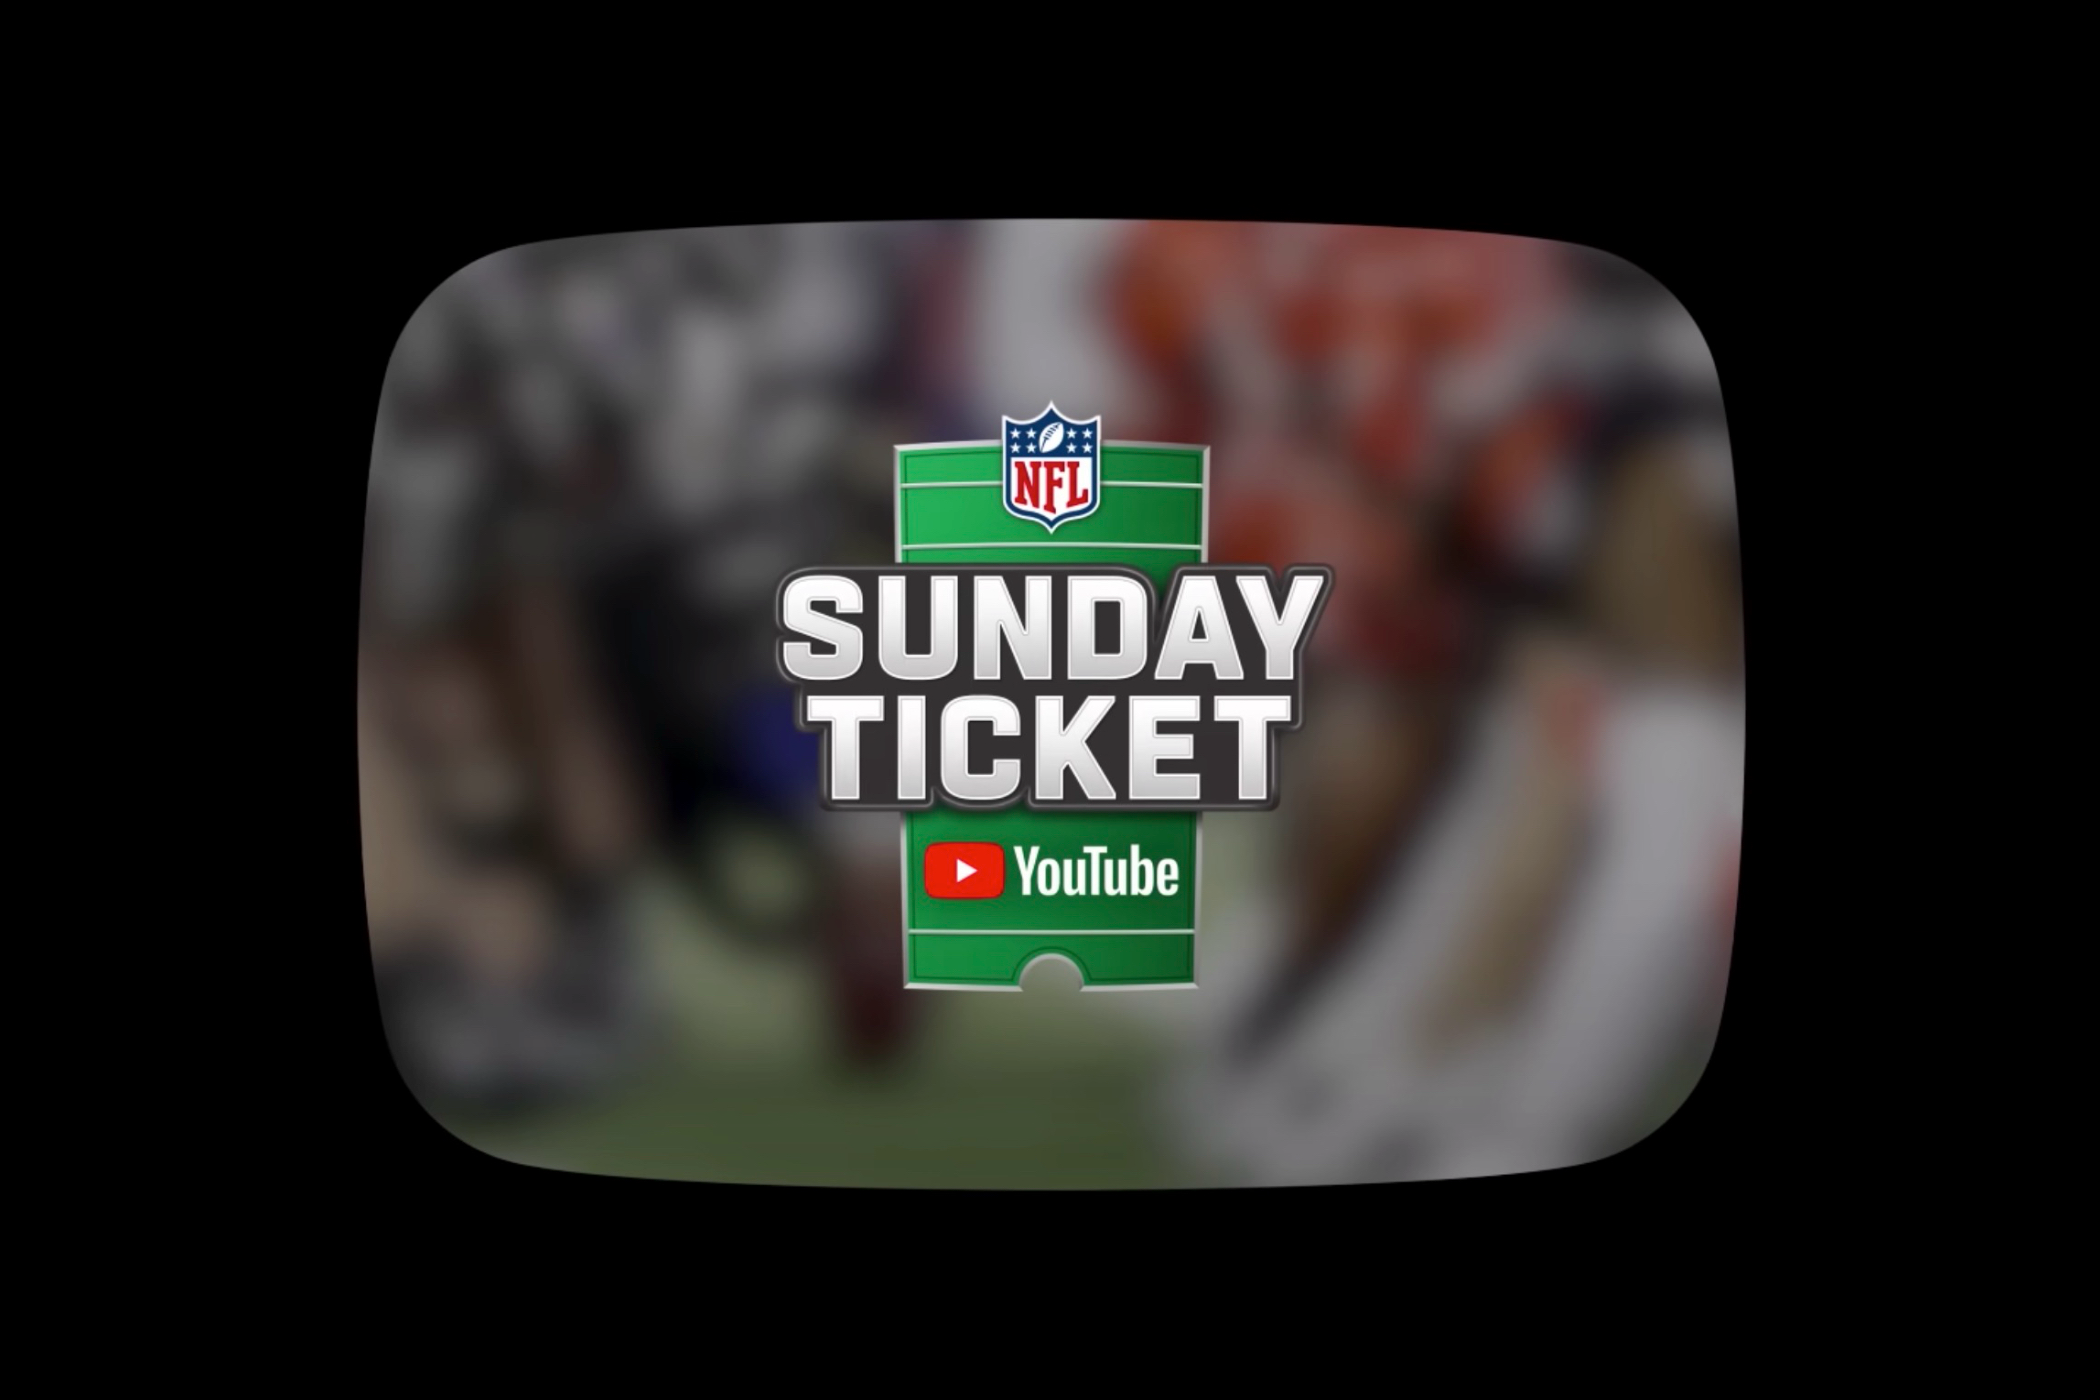 sunday ticket monthly cost